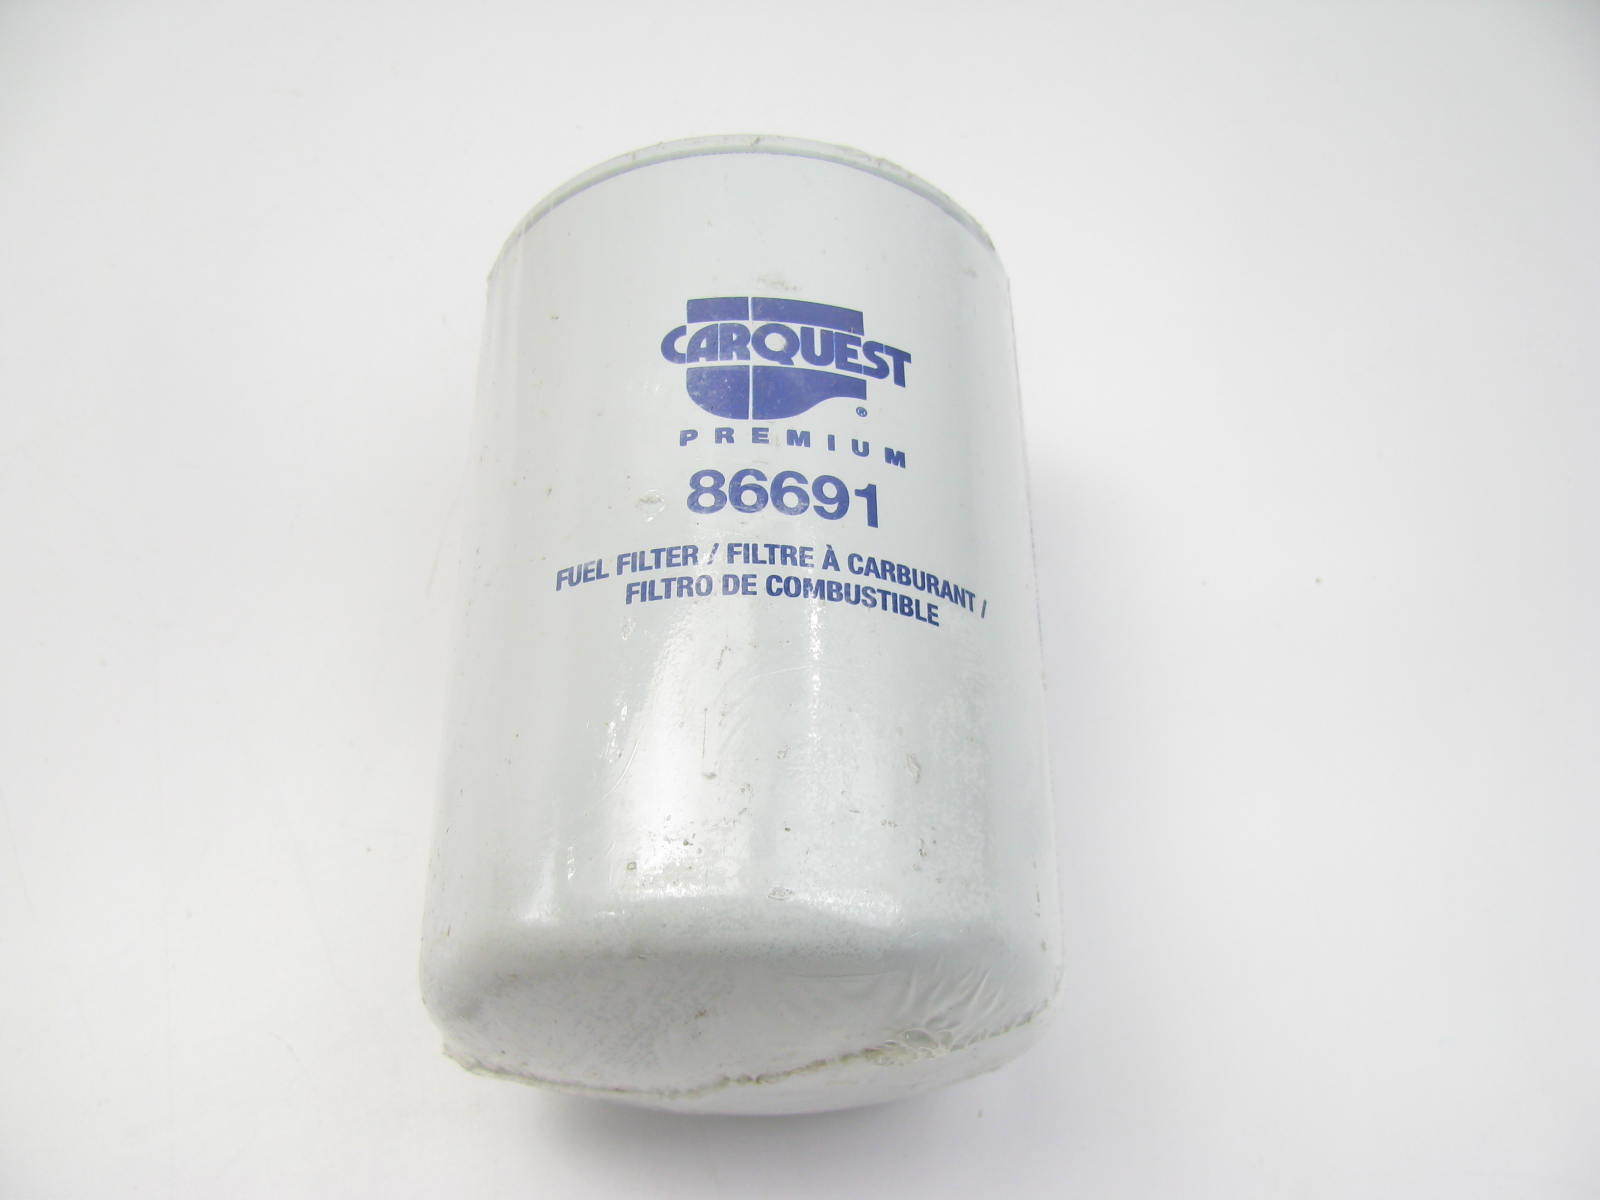 Carquest Fuel Filter Replaces P10272 F65983